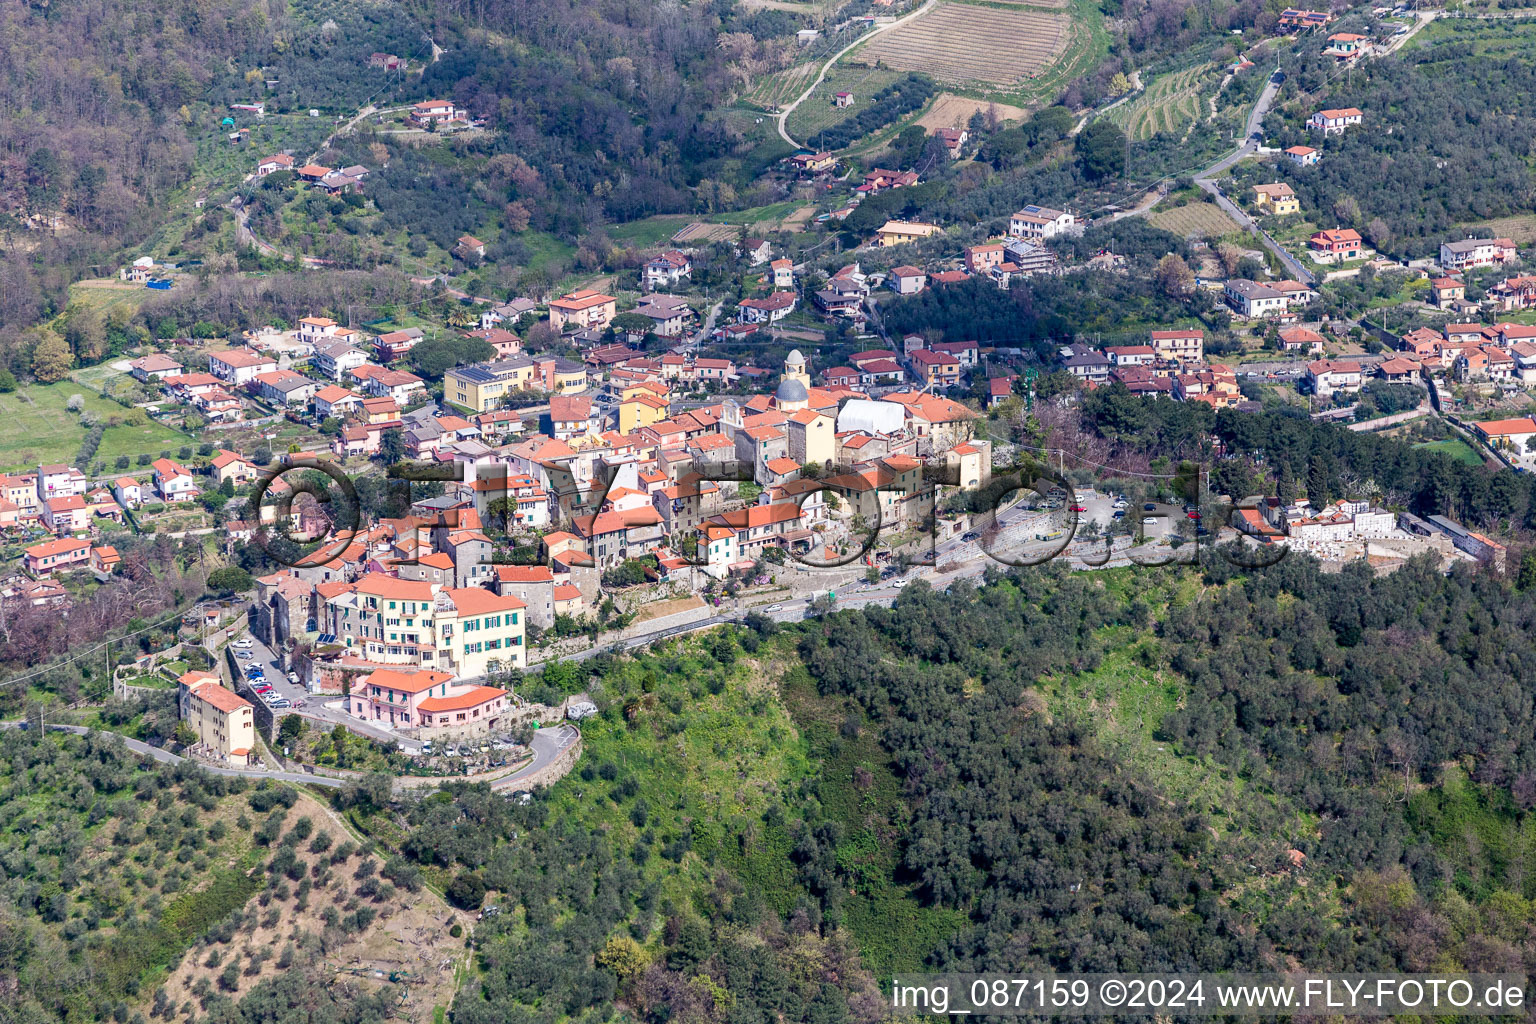 Aerial view of Village view in Nicola in Ligurien, Italy